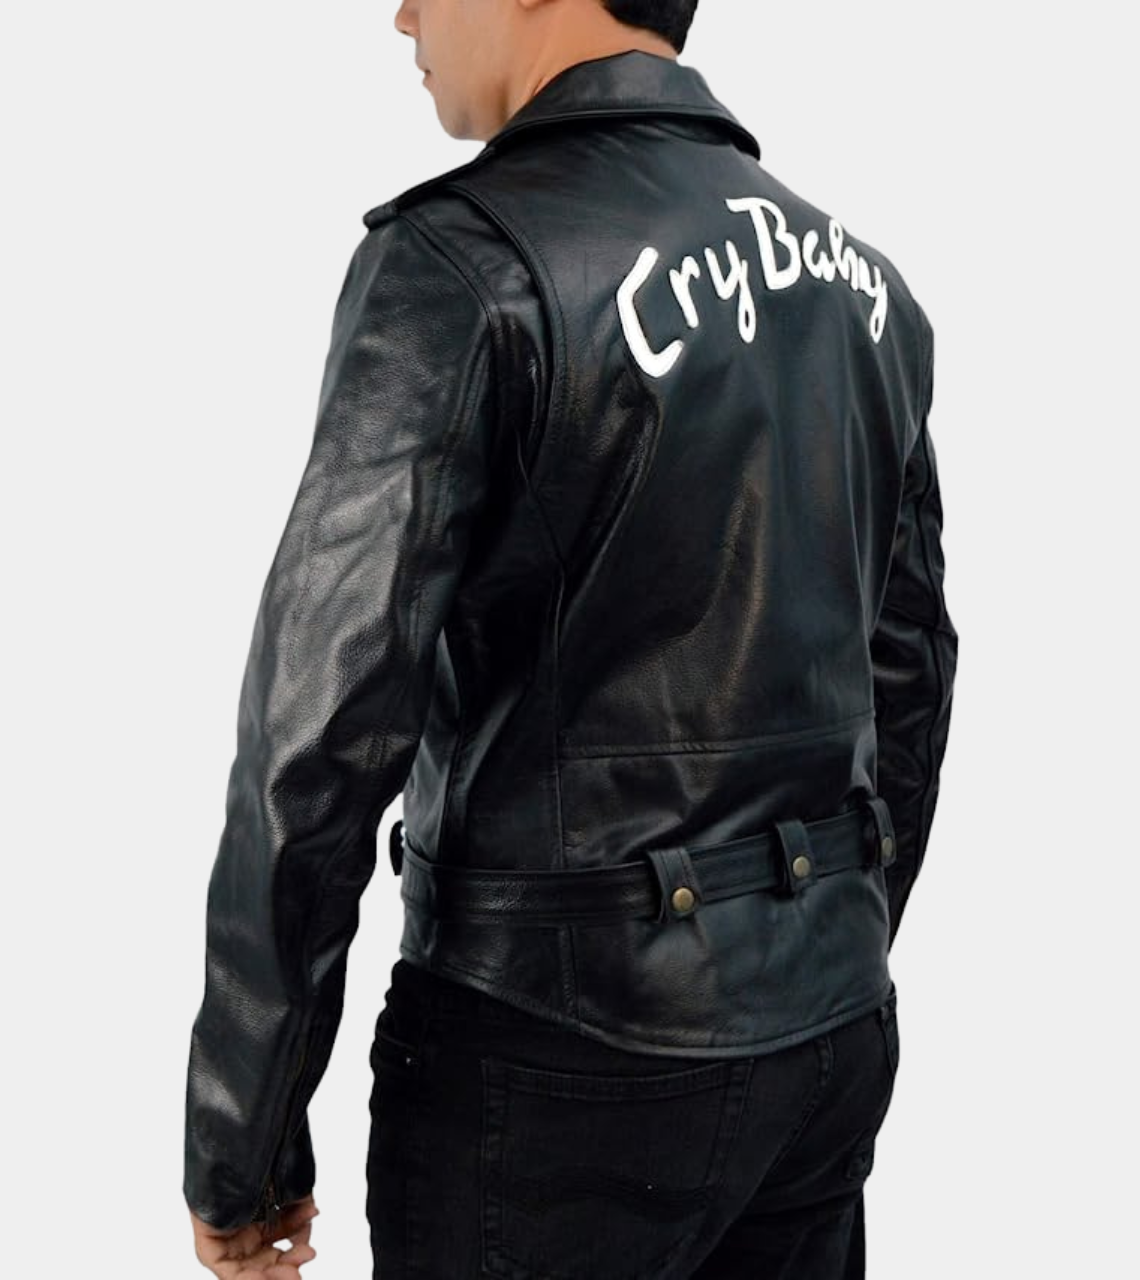 Cry Baby Inspired Leather Jacket